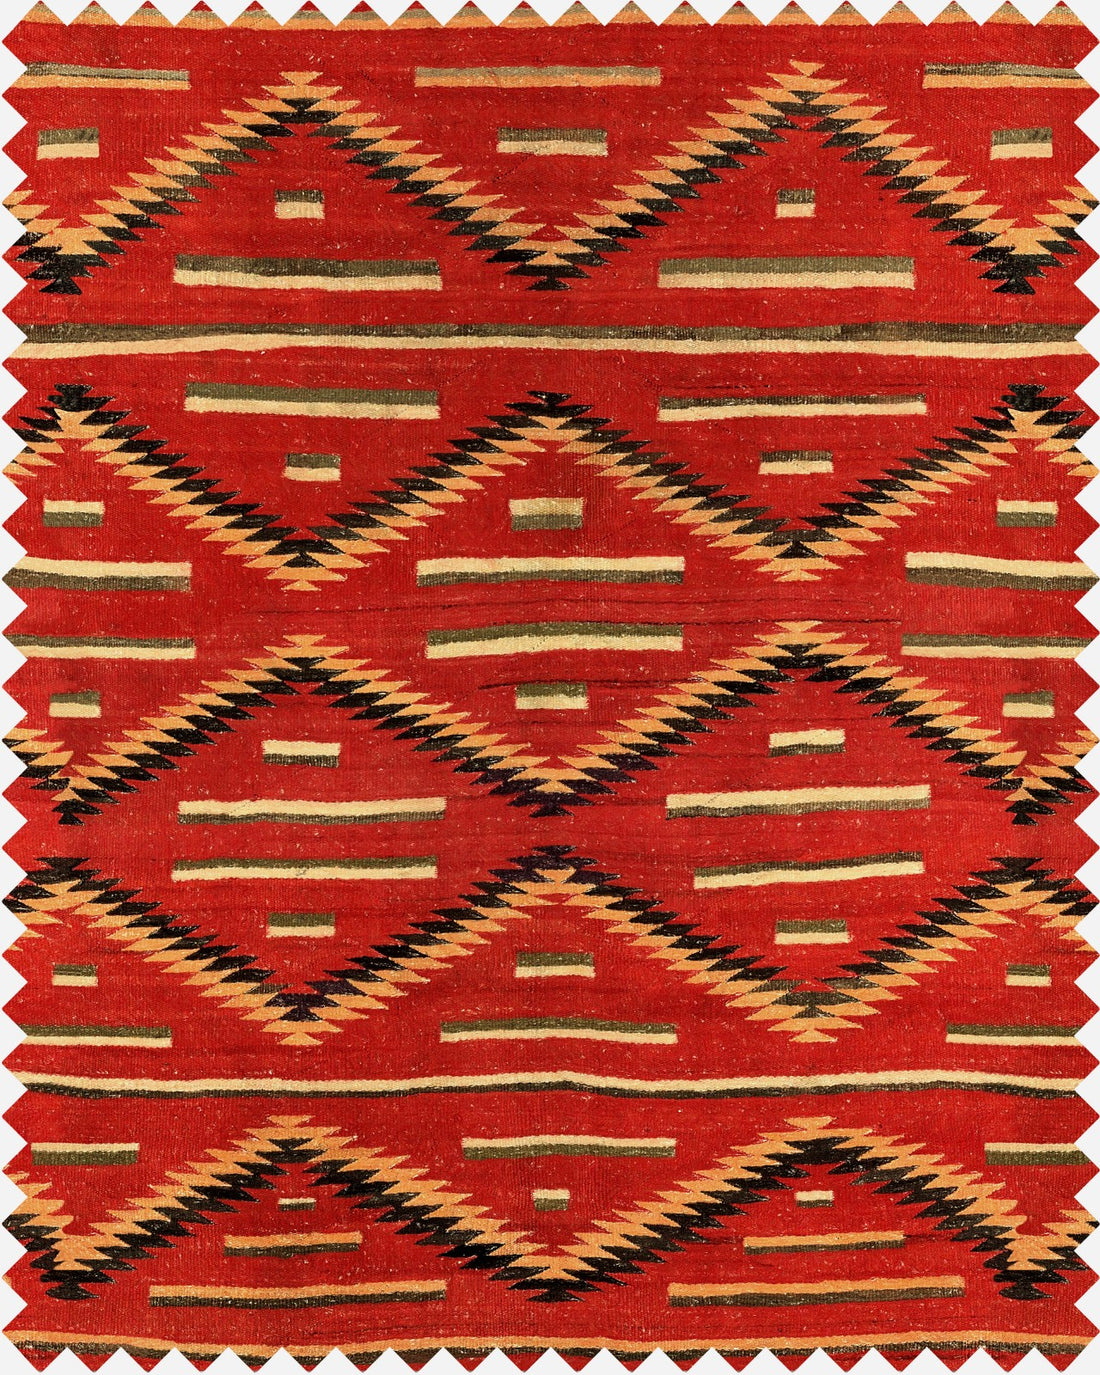 Eyedazzler Navajo fabric in red color - pattern number FB00023 - by Mind The Gap in the Home of an Eccentric Man collection